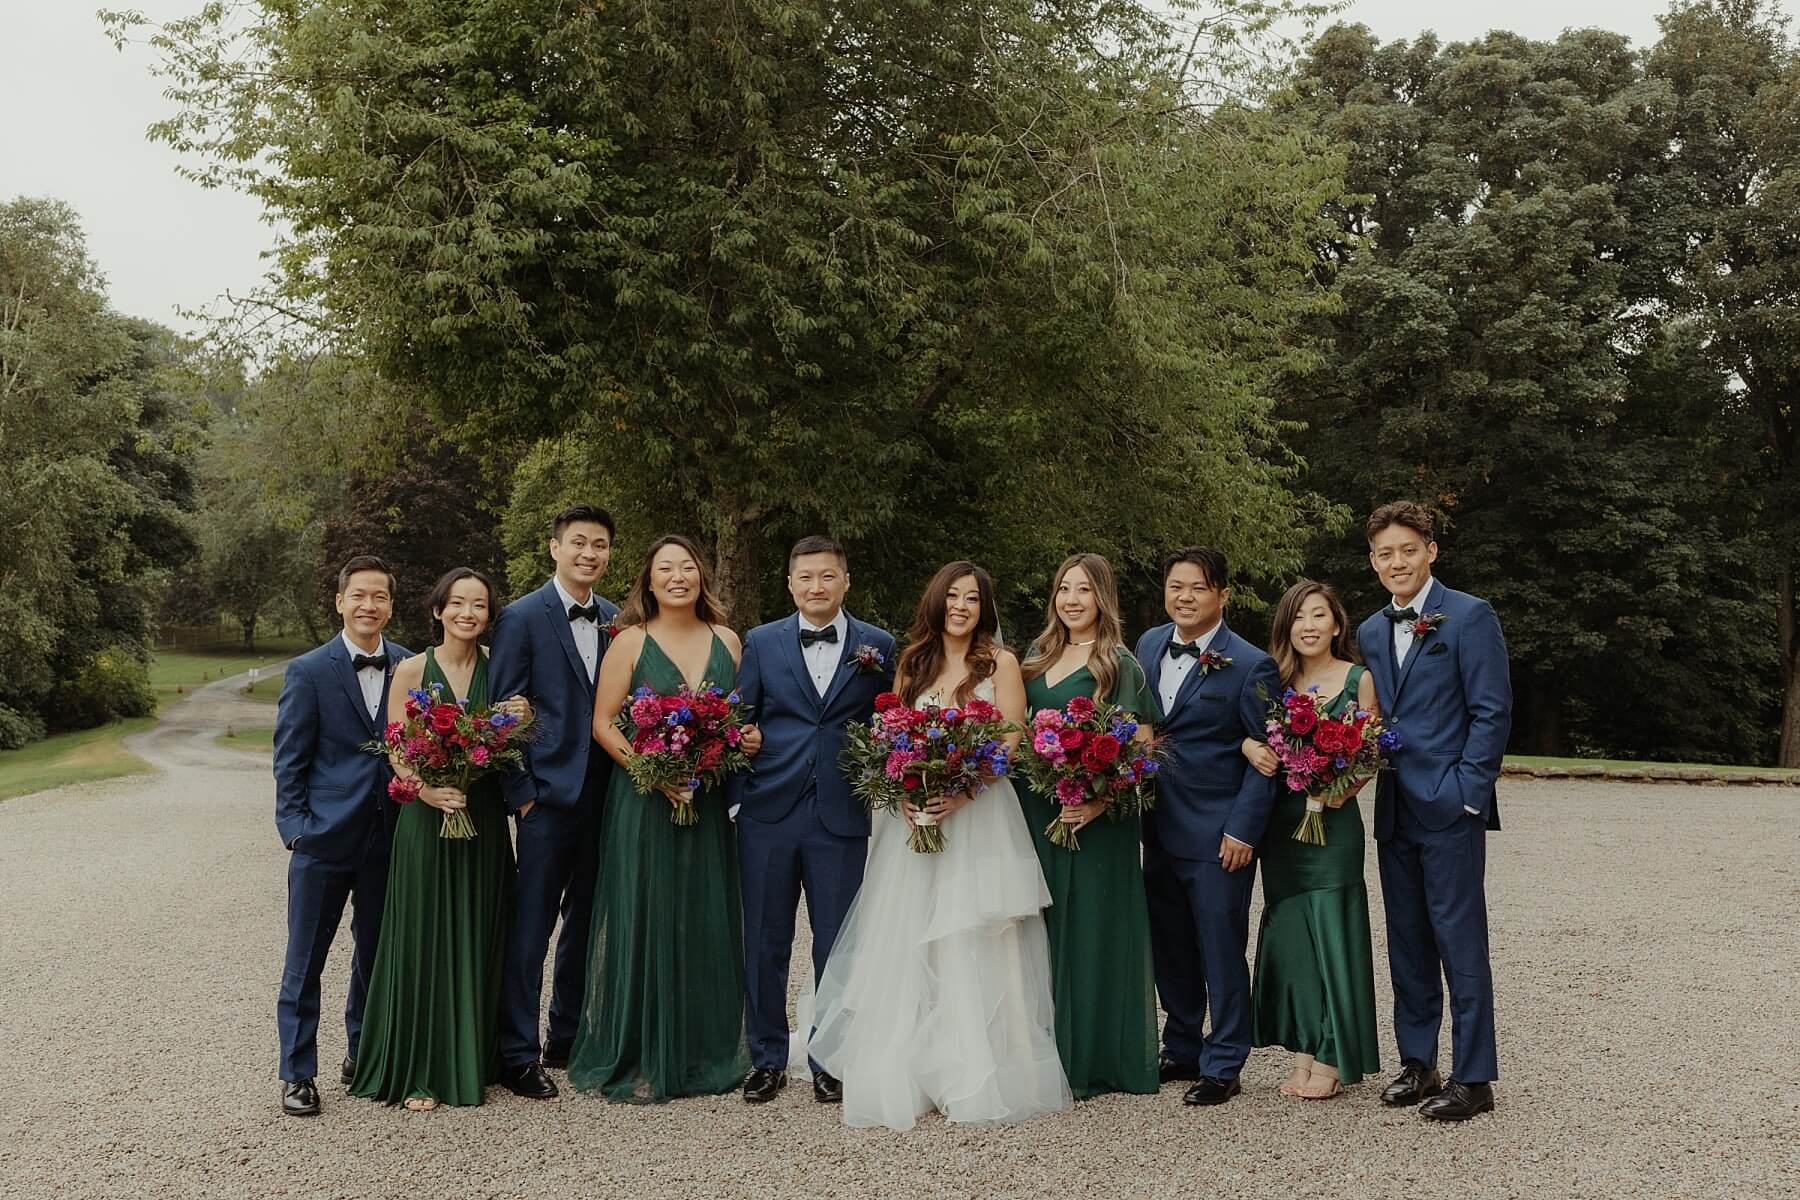 american bride and groom pose with wedding party bridesmaids in green silk dresses and groomsmen in navy suits with bow ties at cluny castle wedding scotland